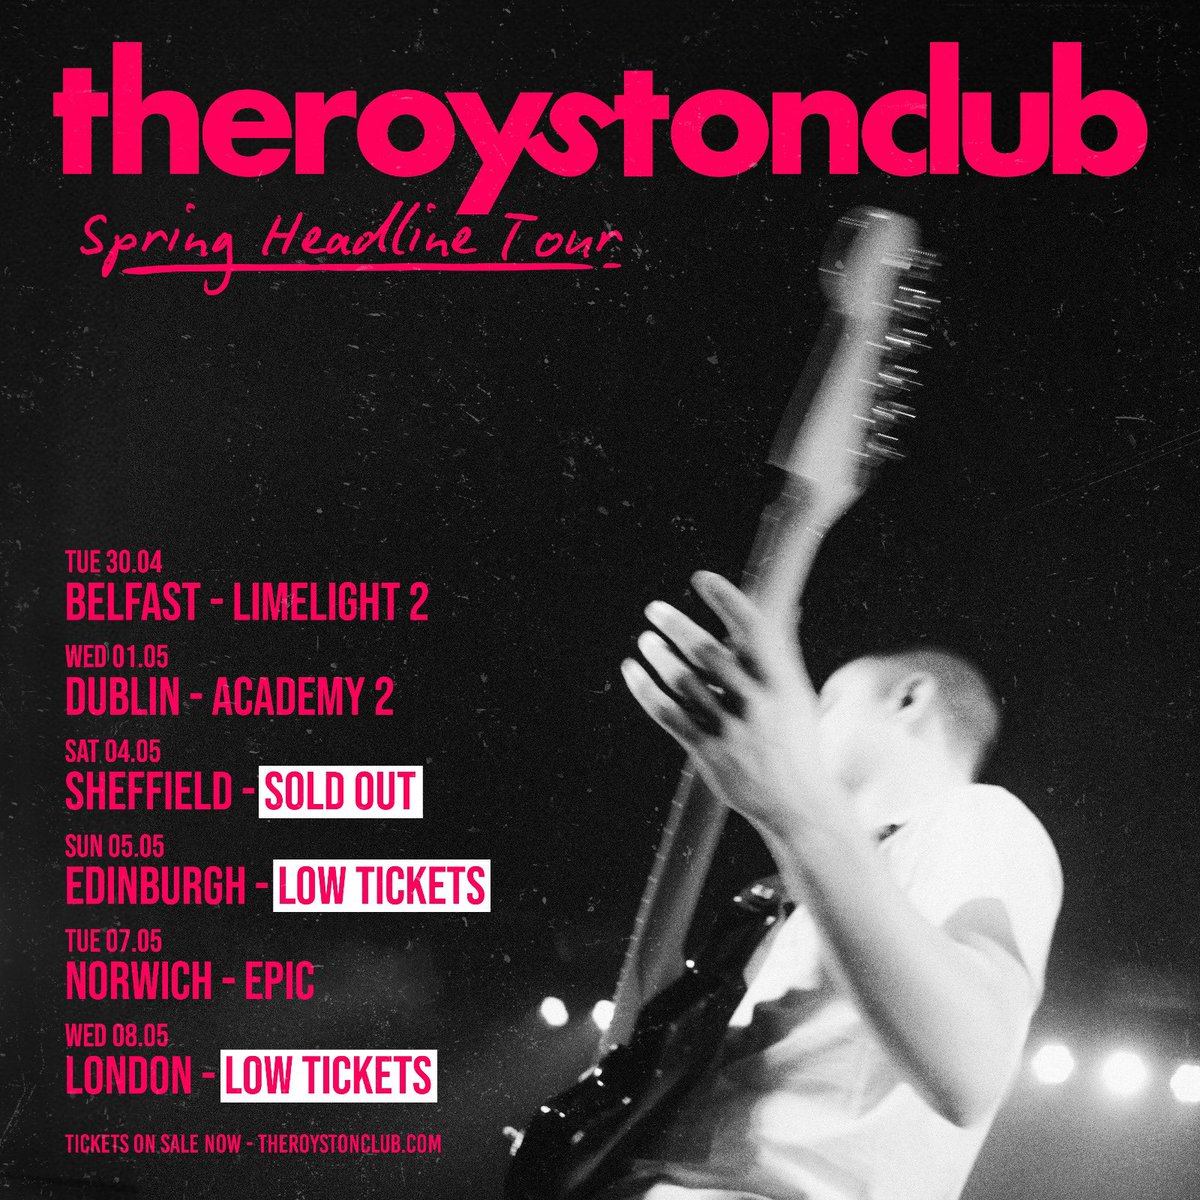 Three weeks till we’re back on tour, low tickets for London and Edinburgh. Who do you wanna see as support? x